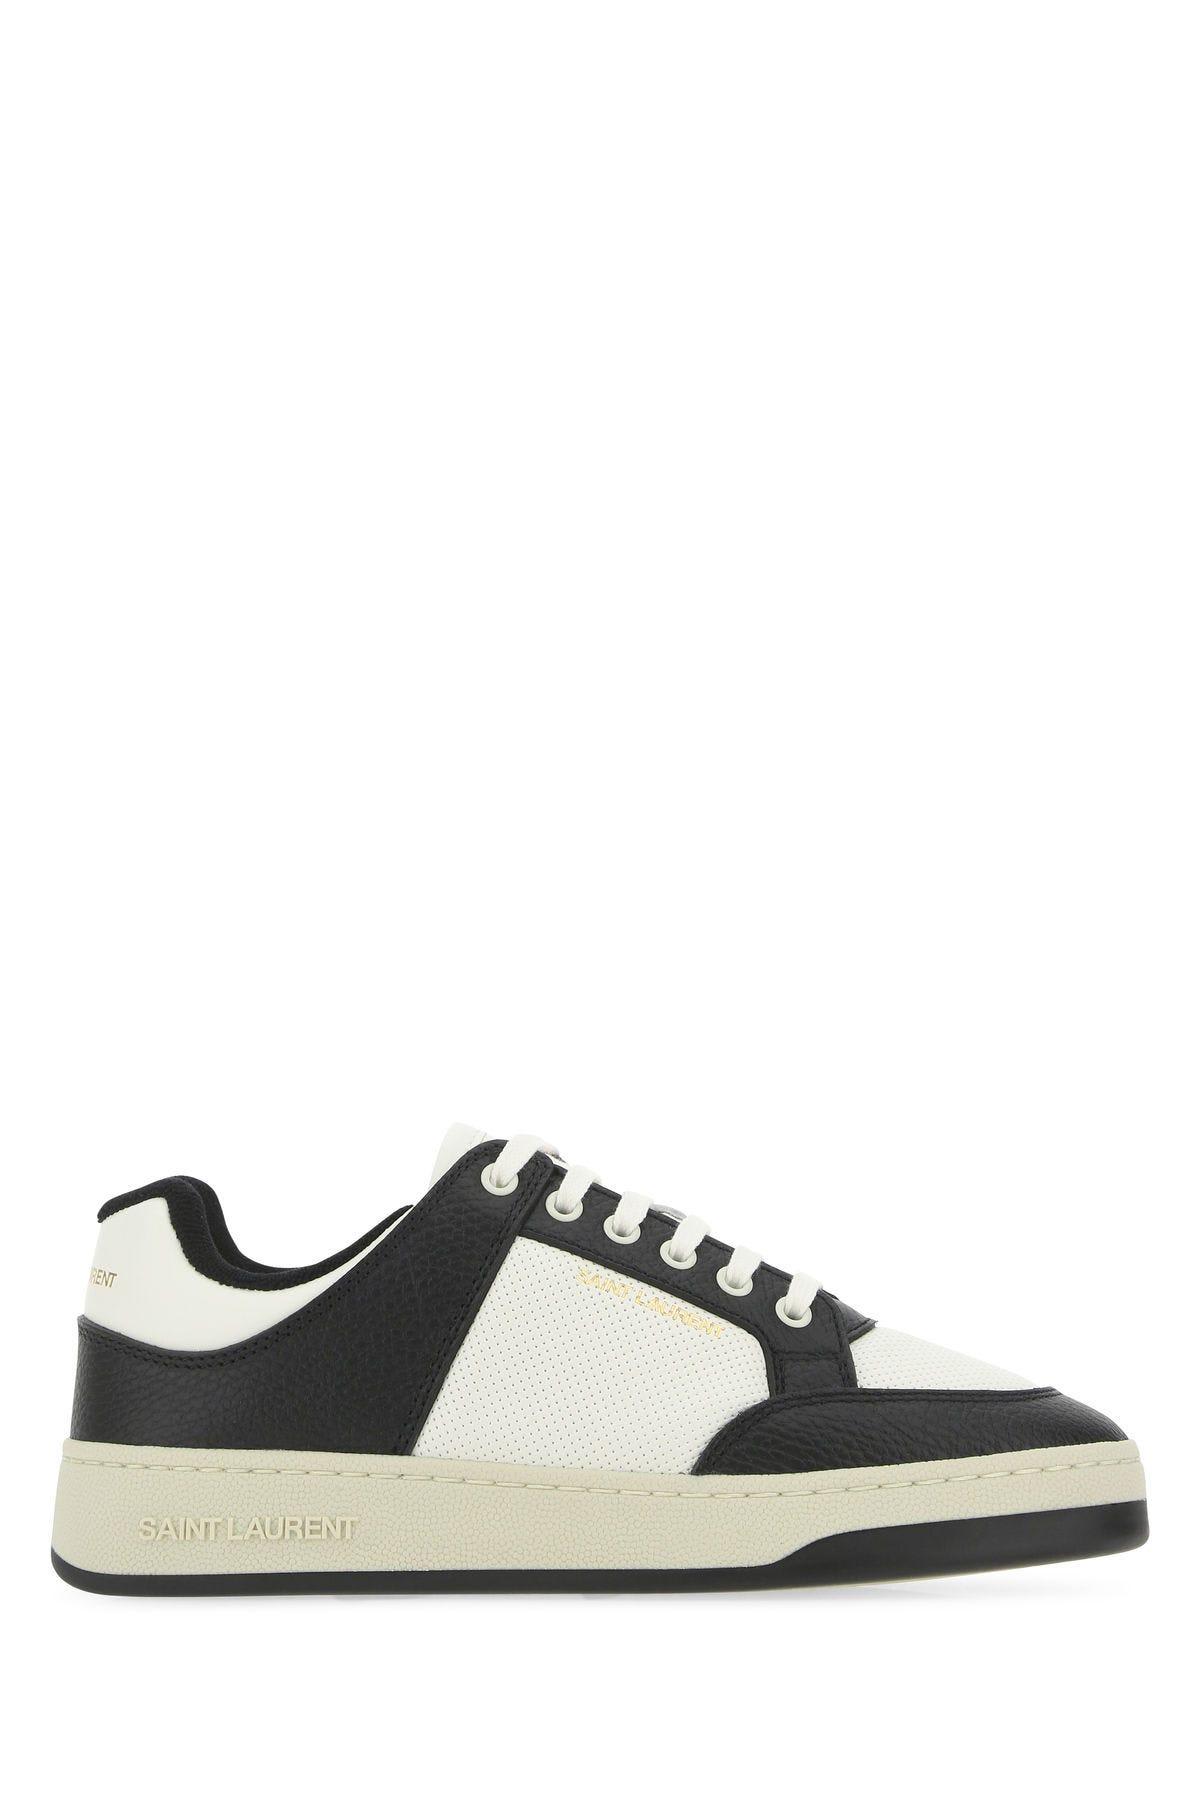 Two-tone Leather Sl/61 Sneakers